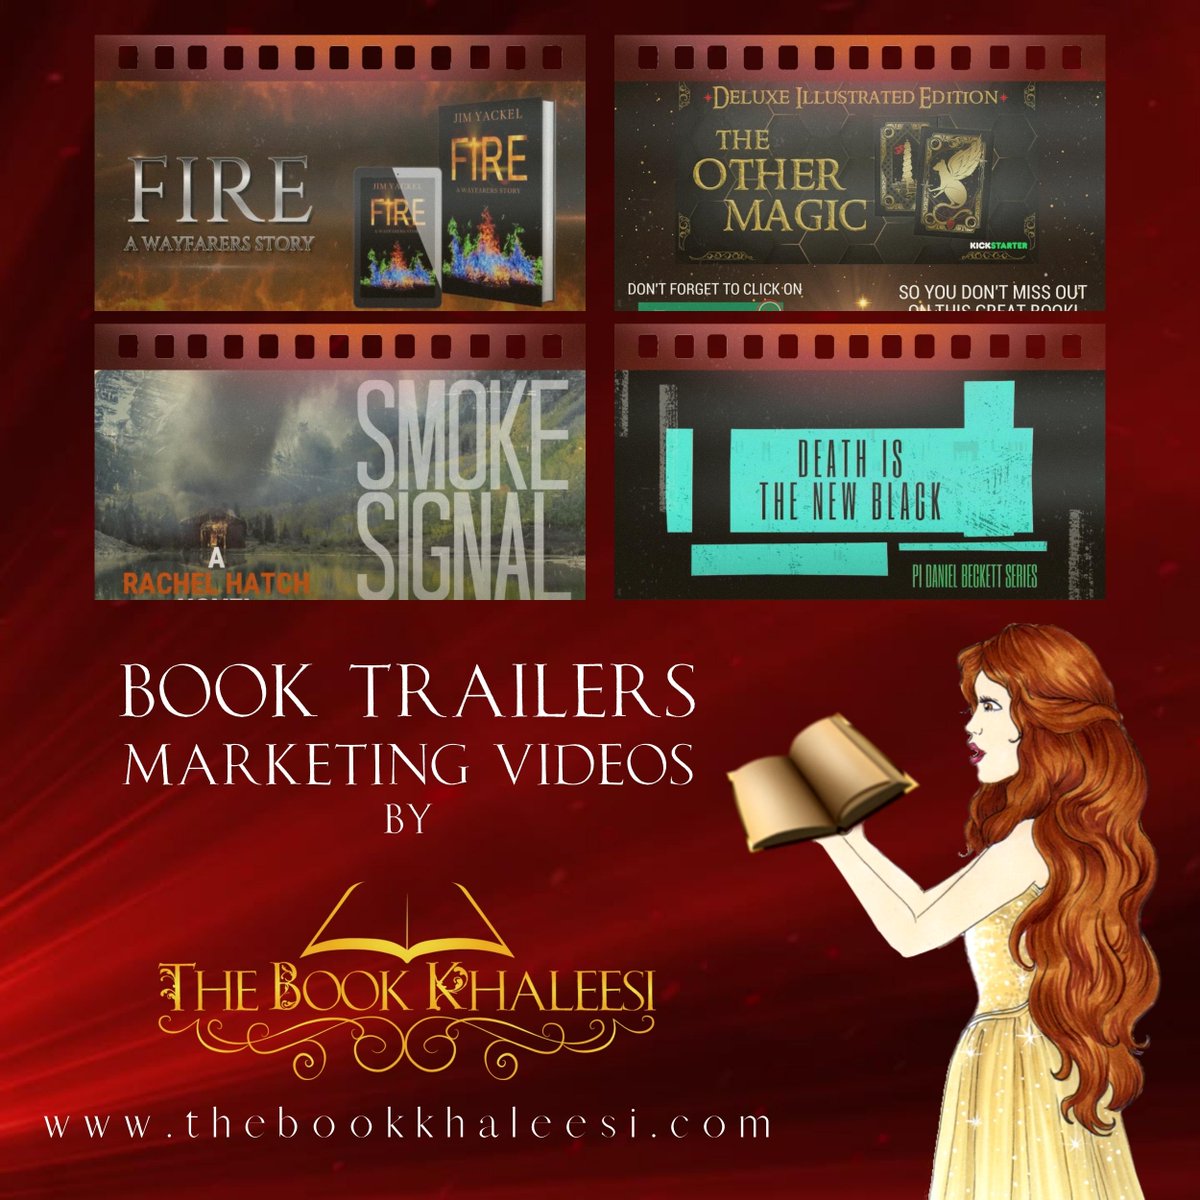 Customized. Original. One of a Kind. Your SYNOPSIS in MOTION. 🎬 thebookkhaleesi.com/2016/08/book-t… 💥 ORDER YOURS! Check out samples on YT. 👉 youtube.com/@EevaLancaster #videomarketing #booktrailers #bookteasers #authors #WritingCommunity